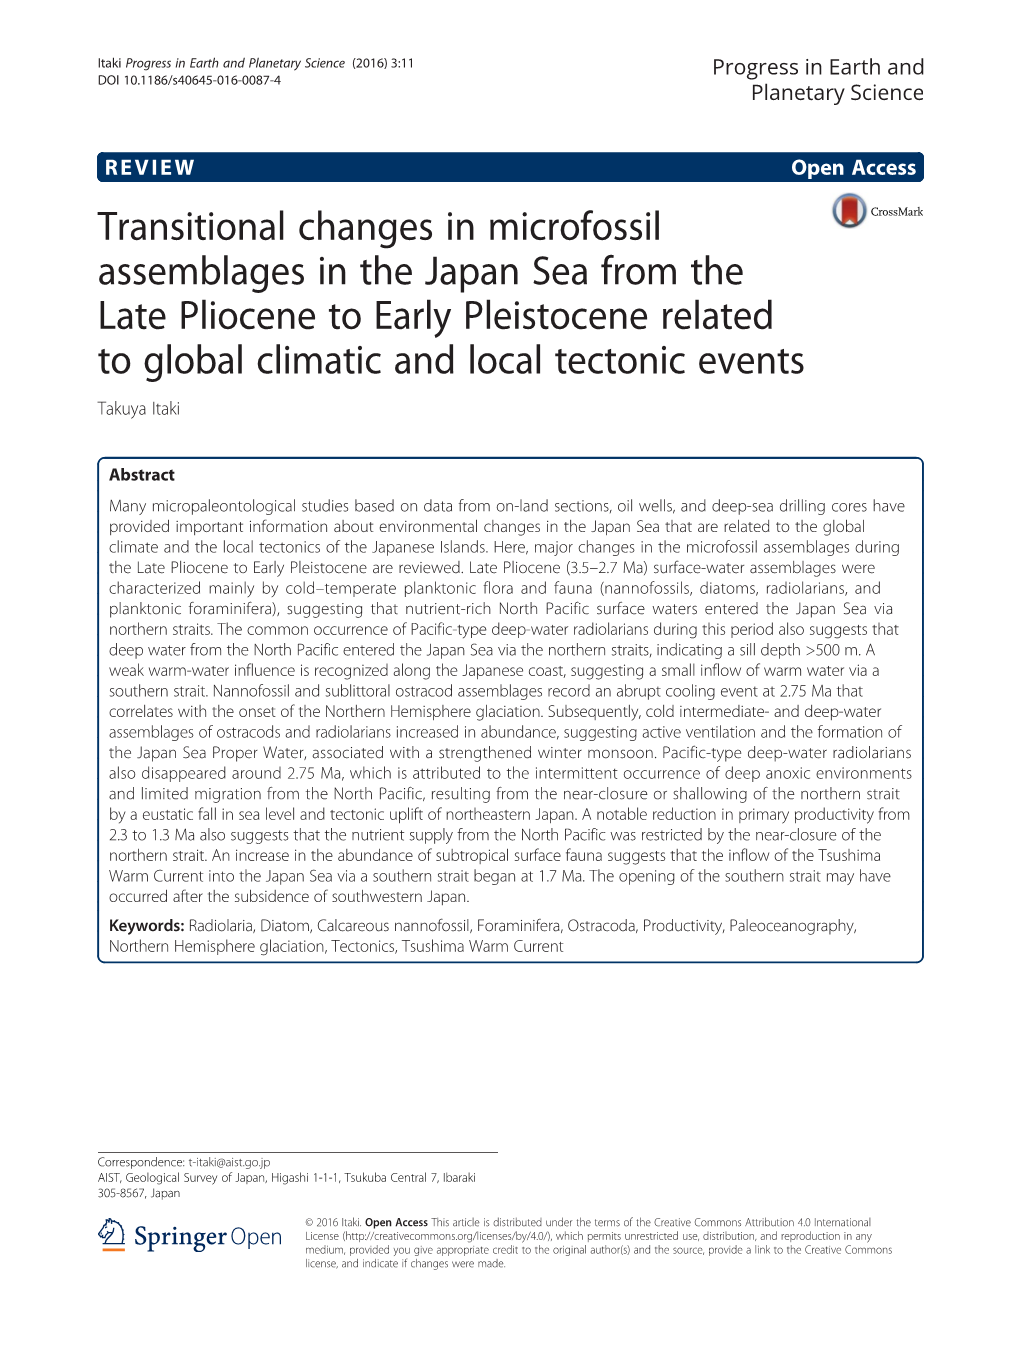 Transitional Changes in Microfossil Assemblages in the Japan Sea from the Late Pliocene to Early Pleistocene Related to Global C